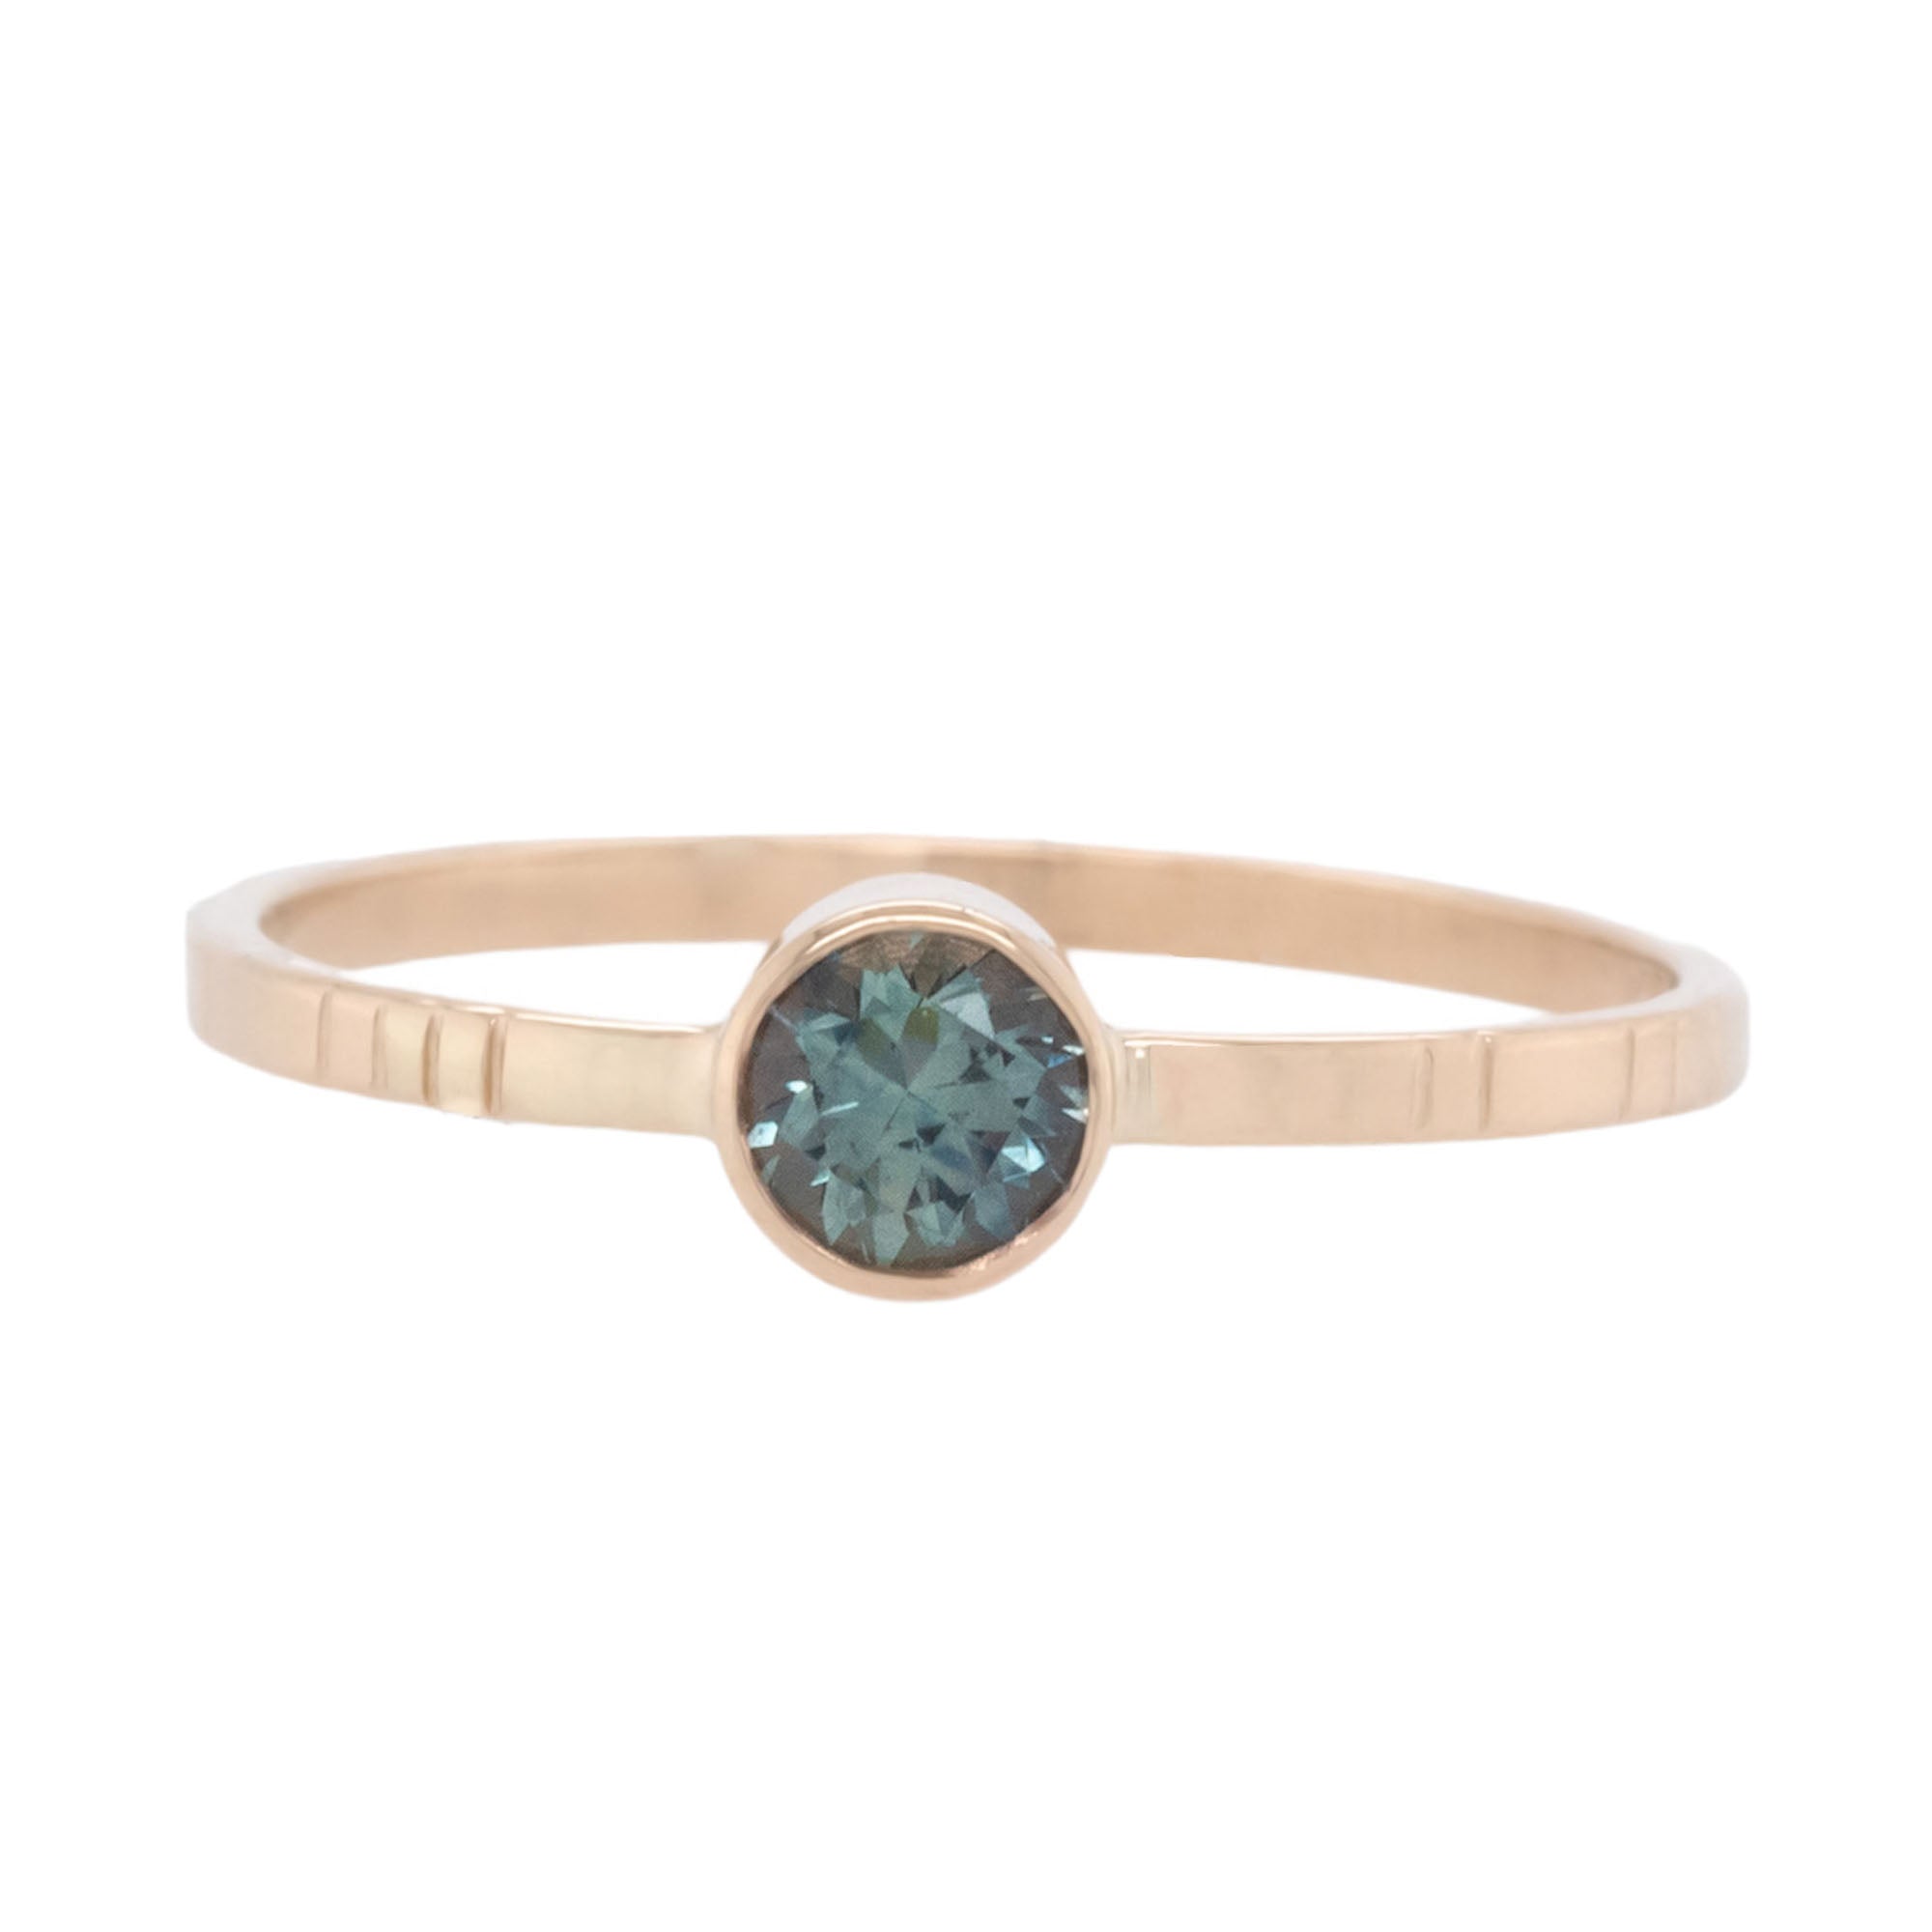 Handcrafted Modelo Ring featuring a vibrant Montana Sapphire set in sustainable metal.